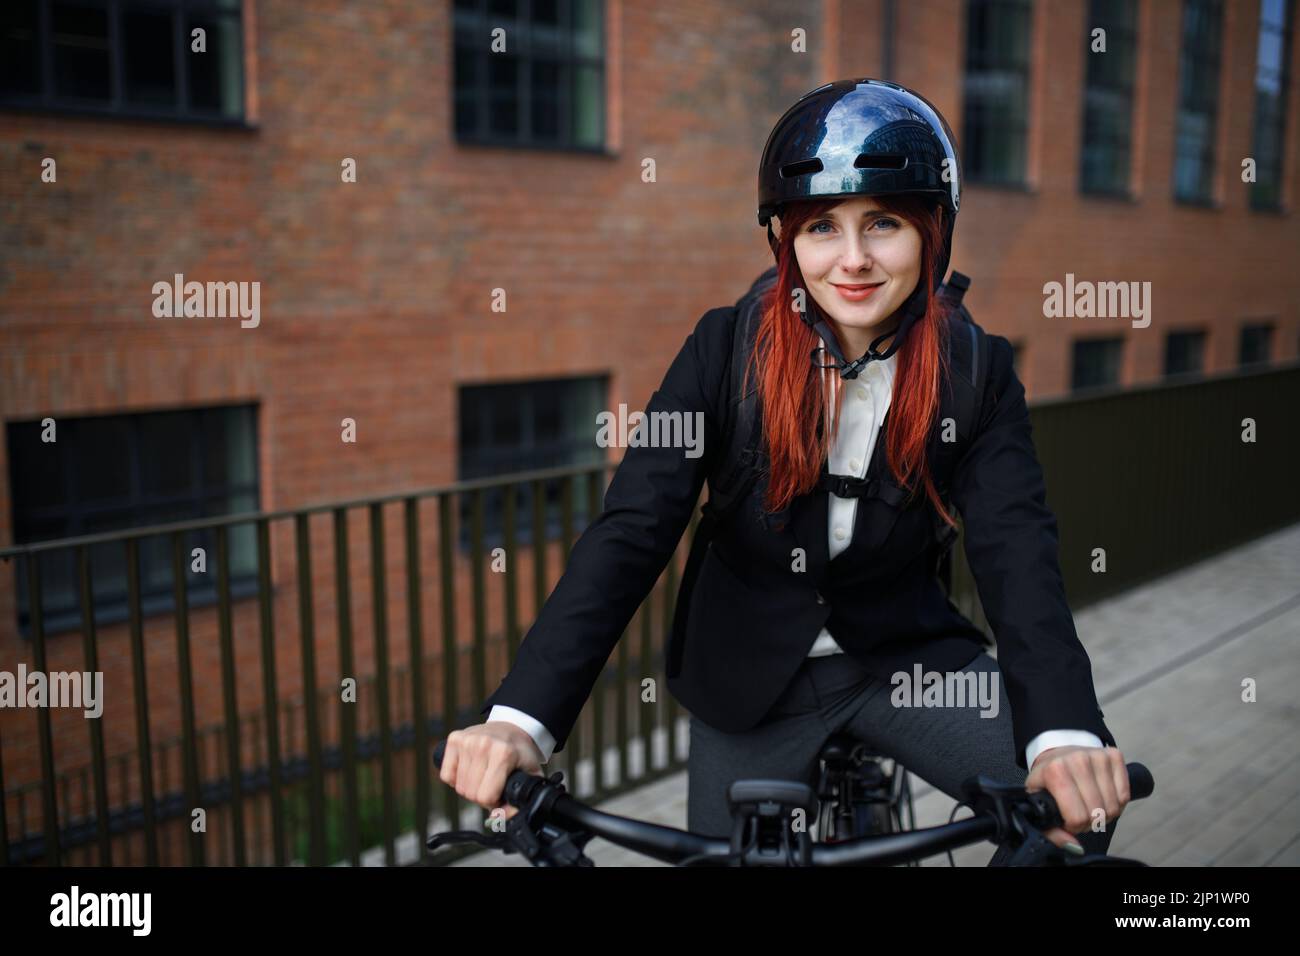 Portrait of businesswoman commuter on the way to work with bike, sustainable lifestyle concept. Stock Photo